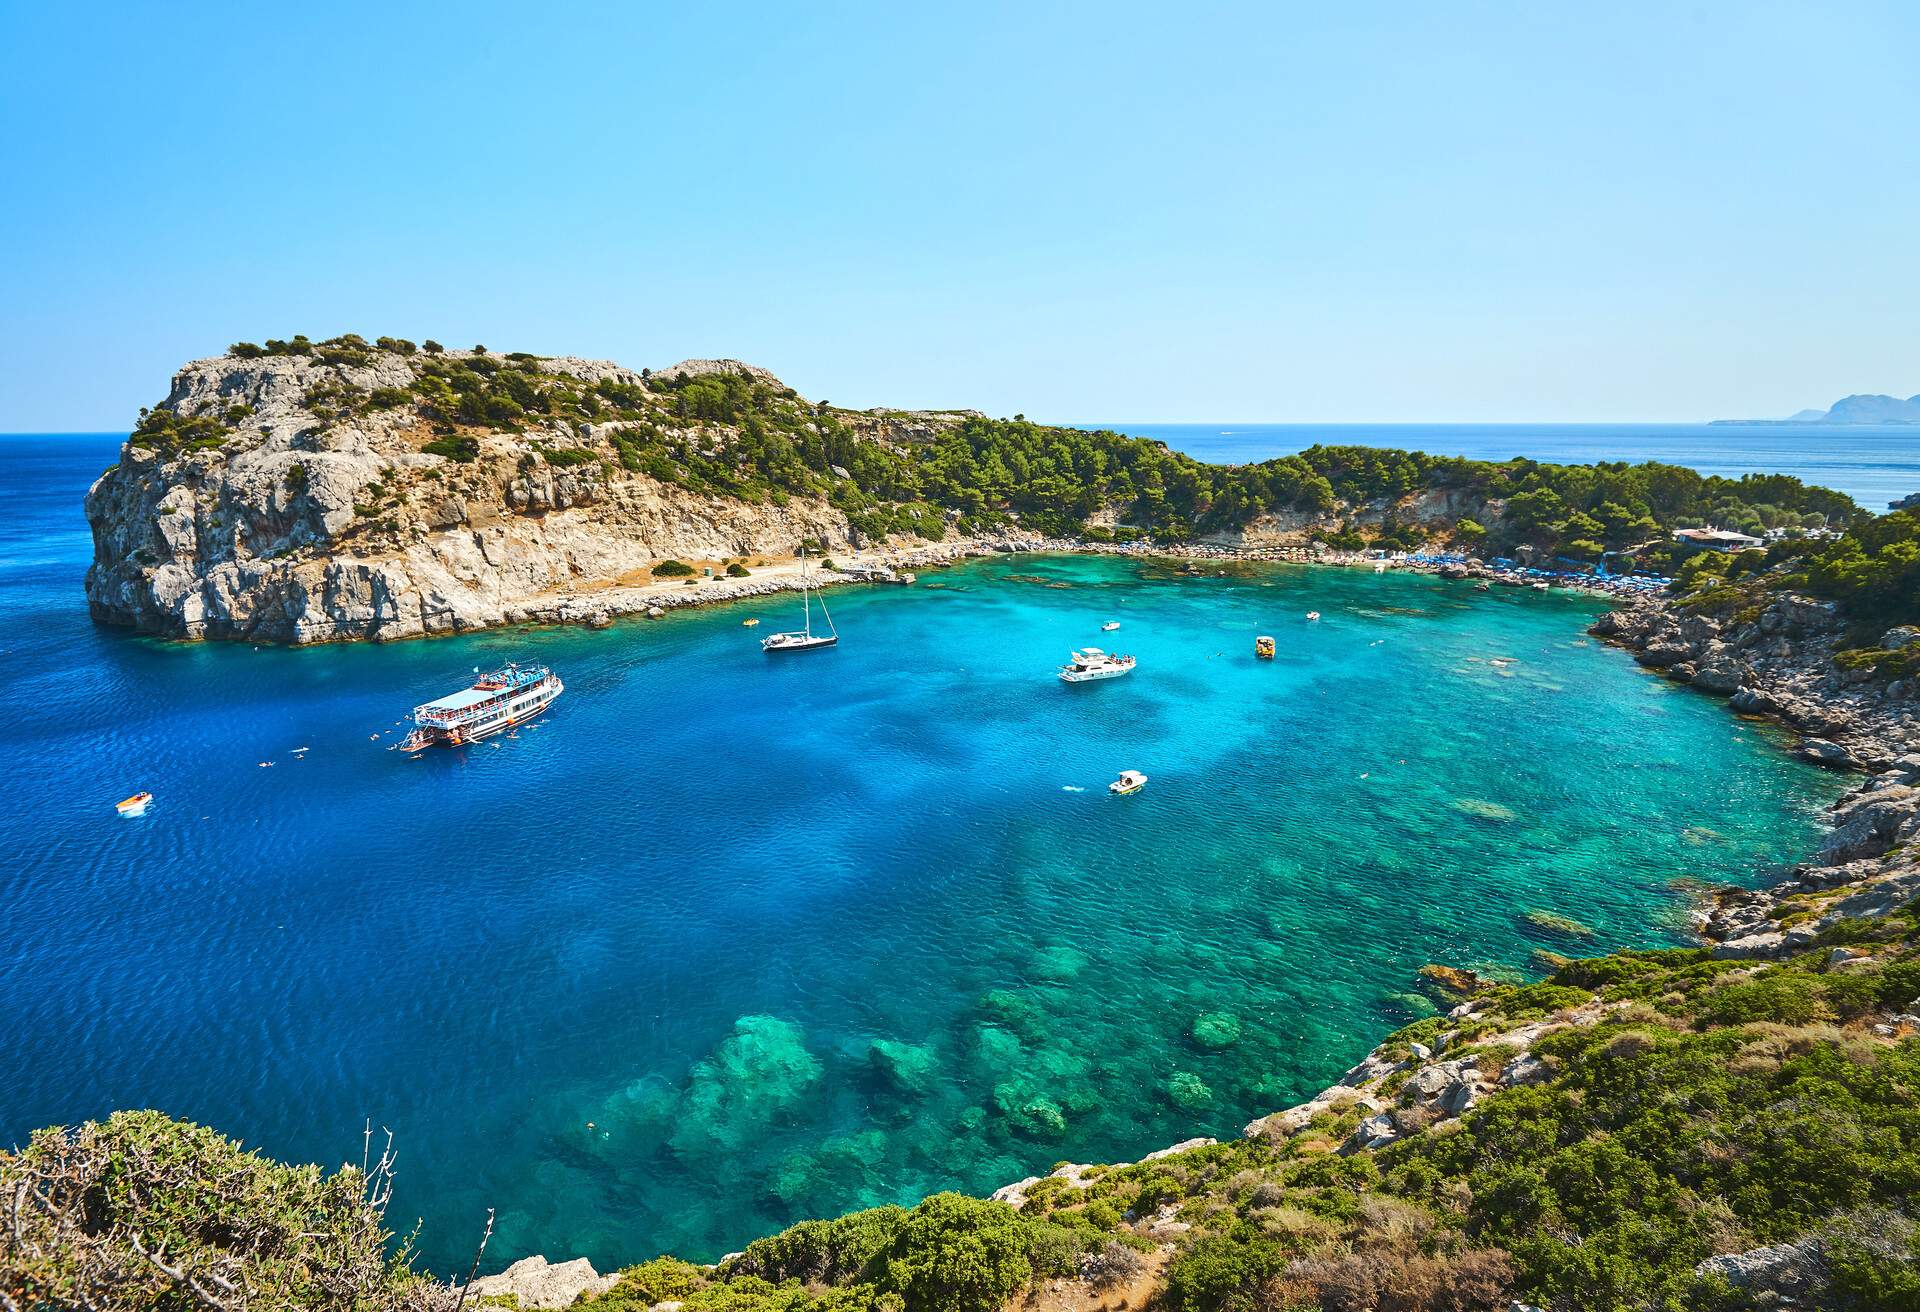 Anthony Quinn Bay. The most beautiful beach at Rhodes island.; Shutterstock ID 1018642171